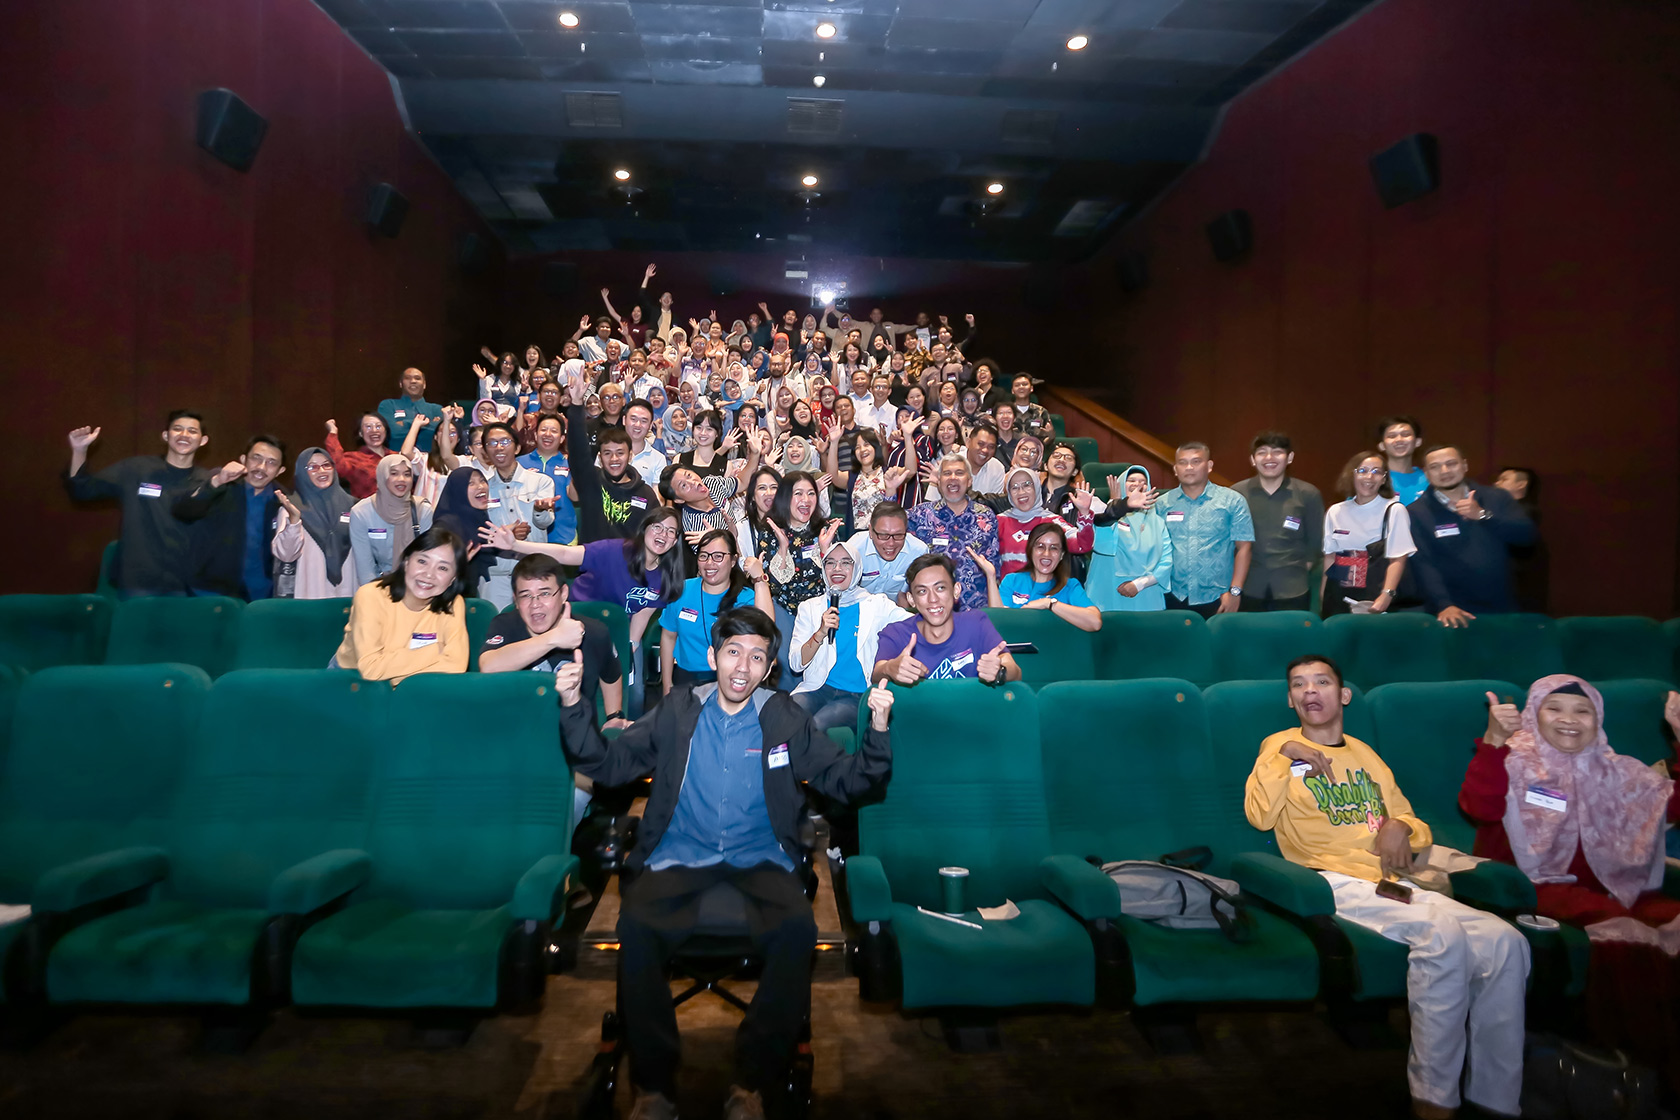 More than 120 alumni gather to reconnect, enjoy food and drinks, and have fun together while watching the film “I Am Woman” at the 'Nobar' with OzAlum event in Bandung.